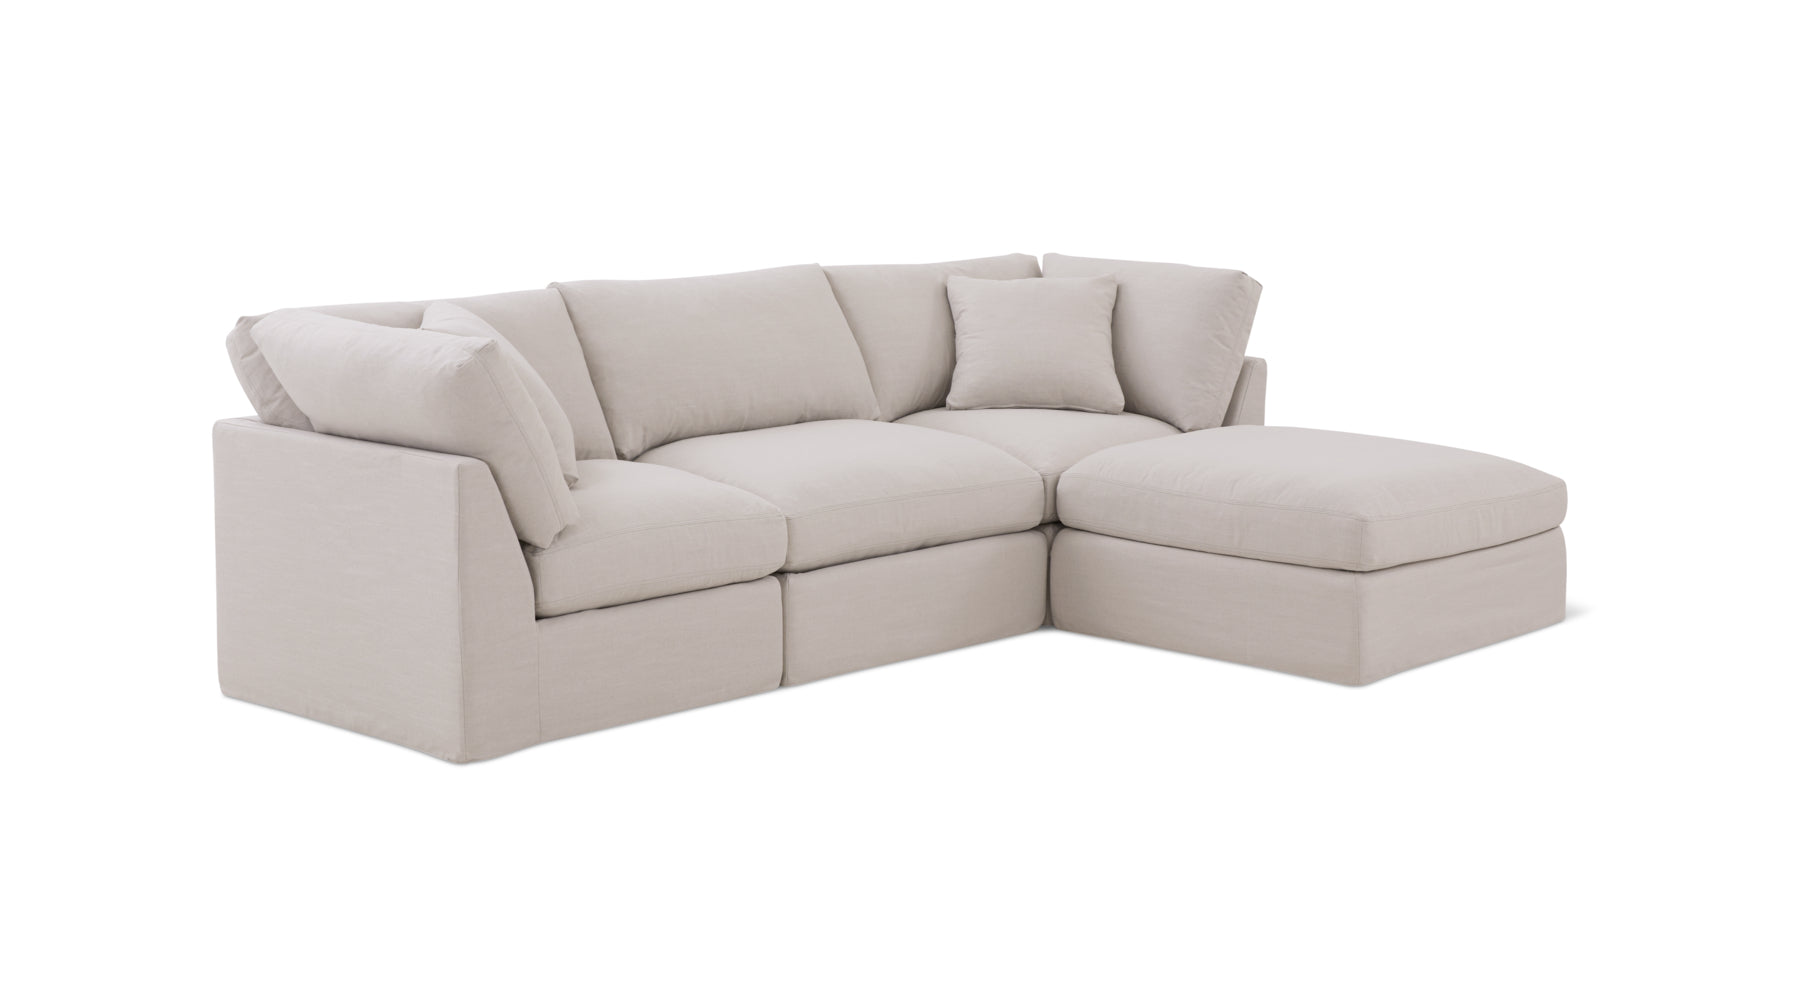 Get Together™ 4-Piece Modular Sectional, Standard, Clay - Image 5